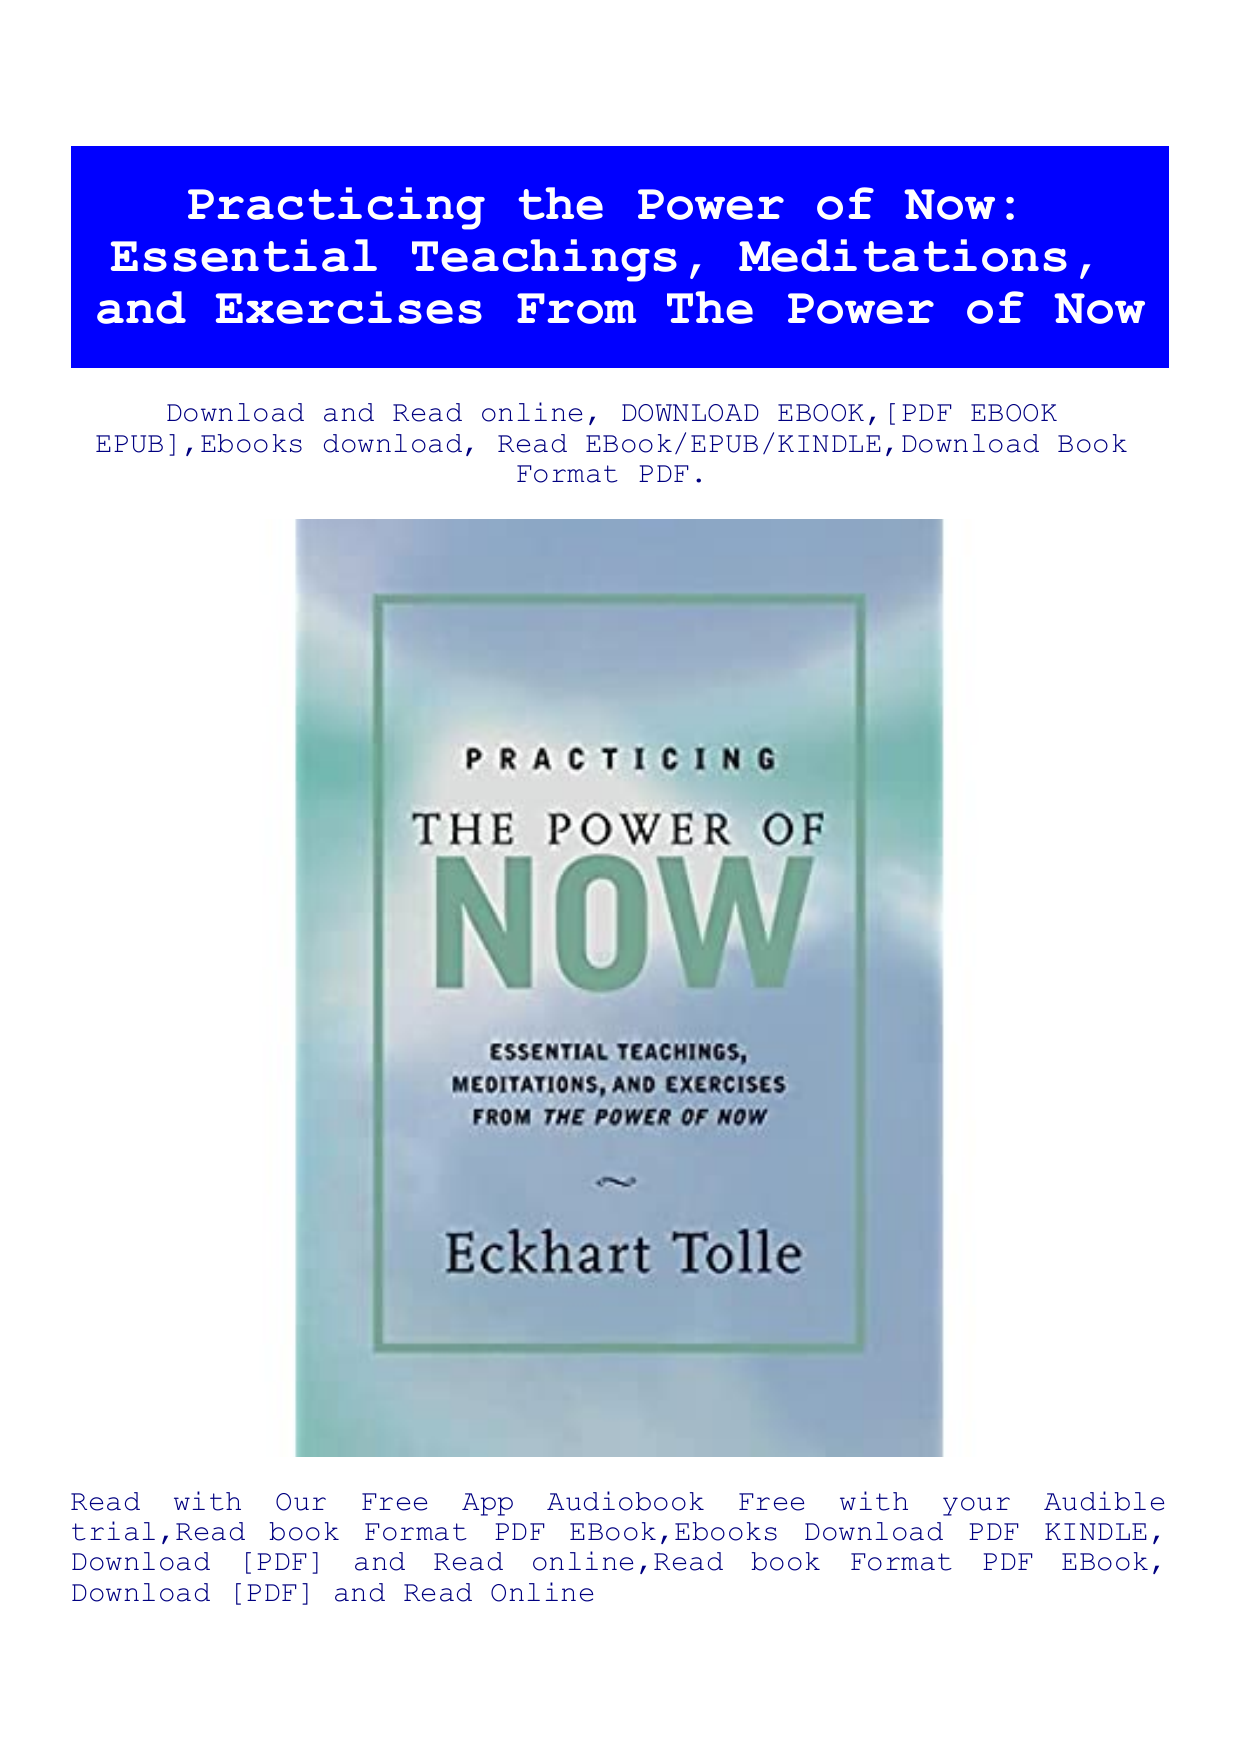 eckhart tolle a new earth audiobook pdf